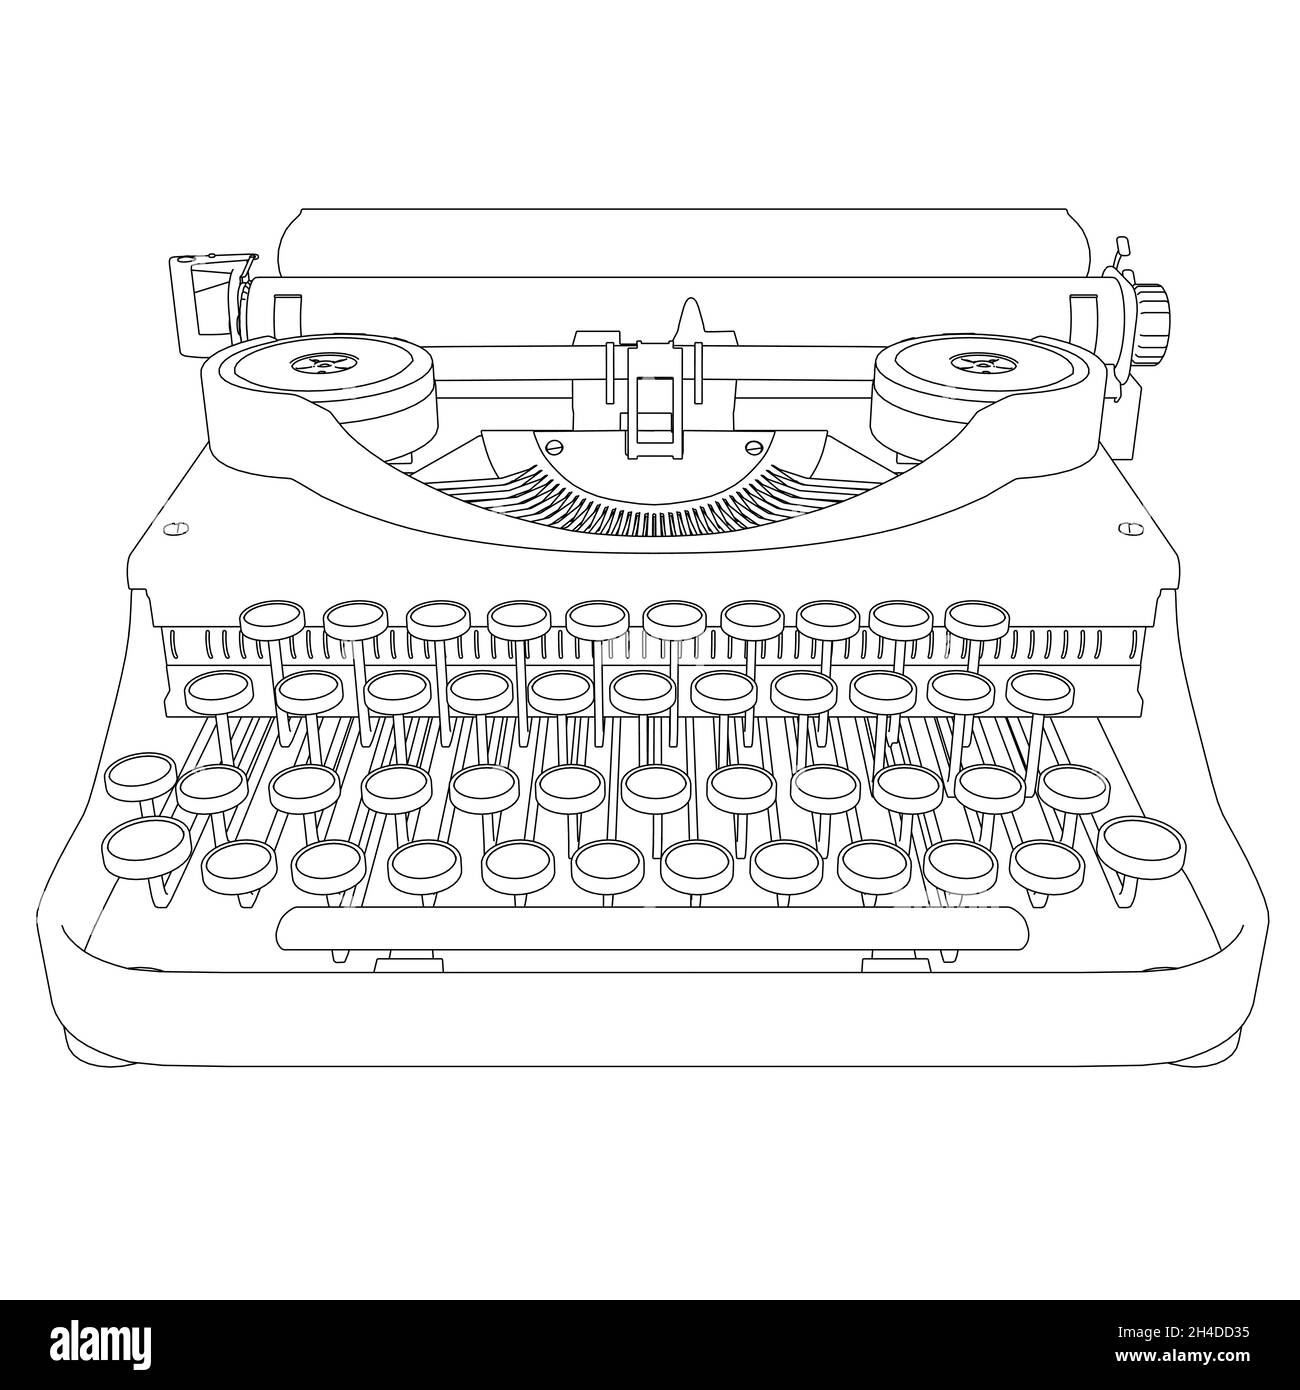 Outline of a vintage typewriter from black lines isolated on white background. Front view. Vector illustration Stock Vector